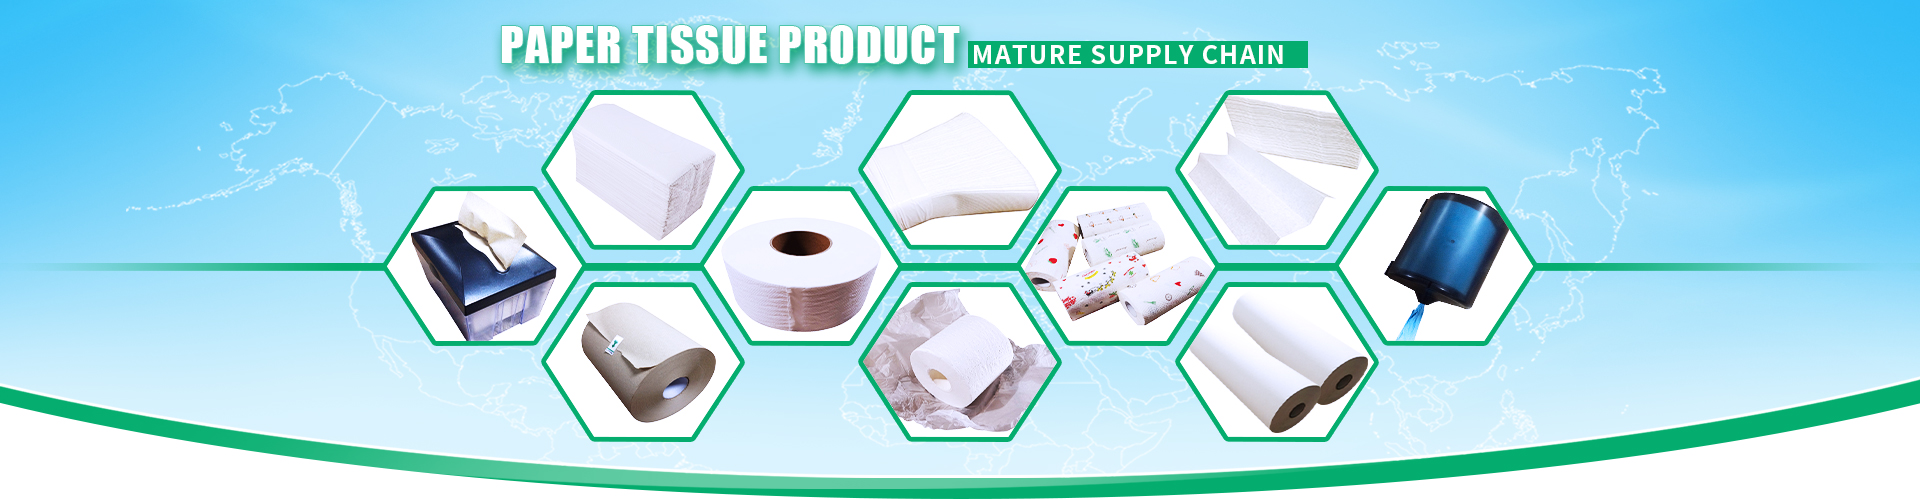 Wet Wipes - Chaozhou Soft Paper Products Co.,Ltd